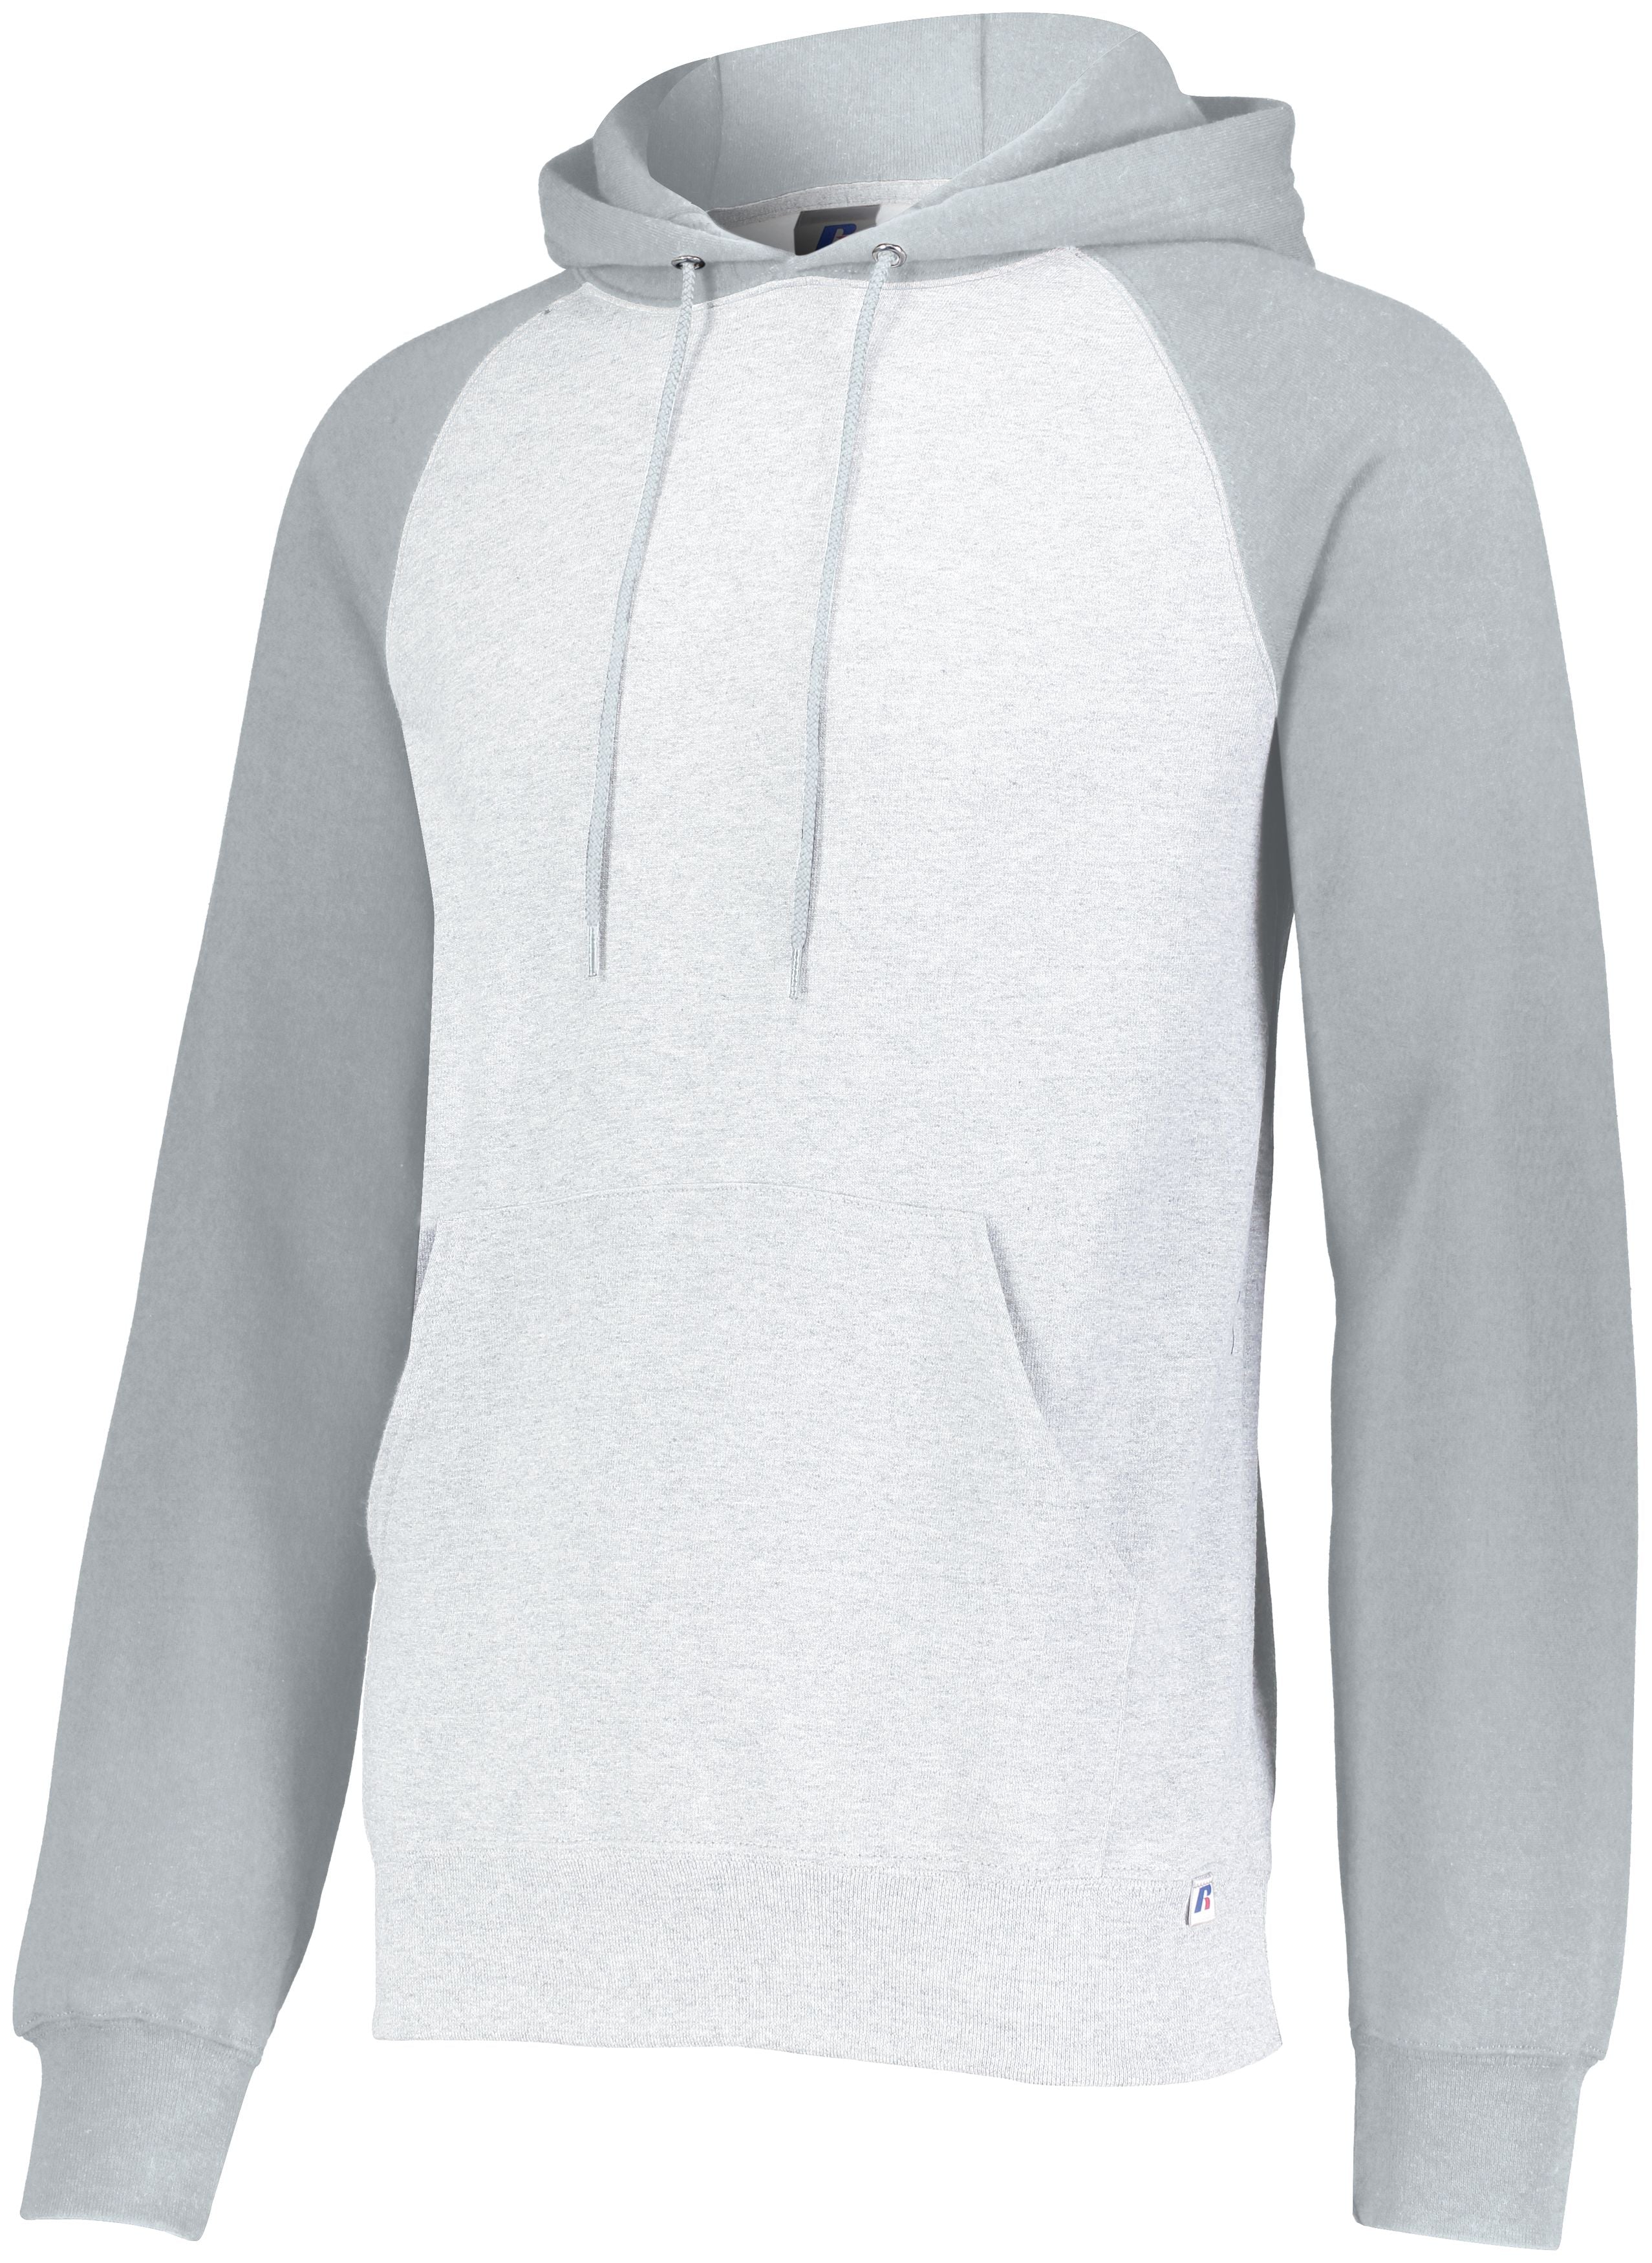 Russell Athletic Dri-Power  Fleece Colorblock Hoodie in White/Oxford  -Part of the Adult, Russell-Athletic-Products, Shirts product lines at KanaleyCreations.com